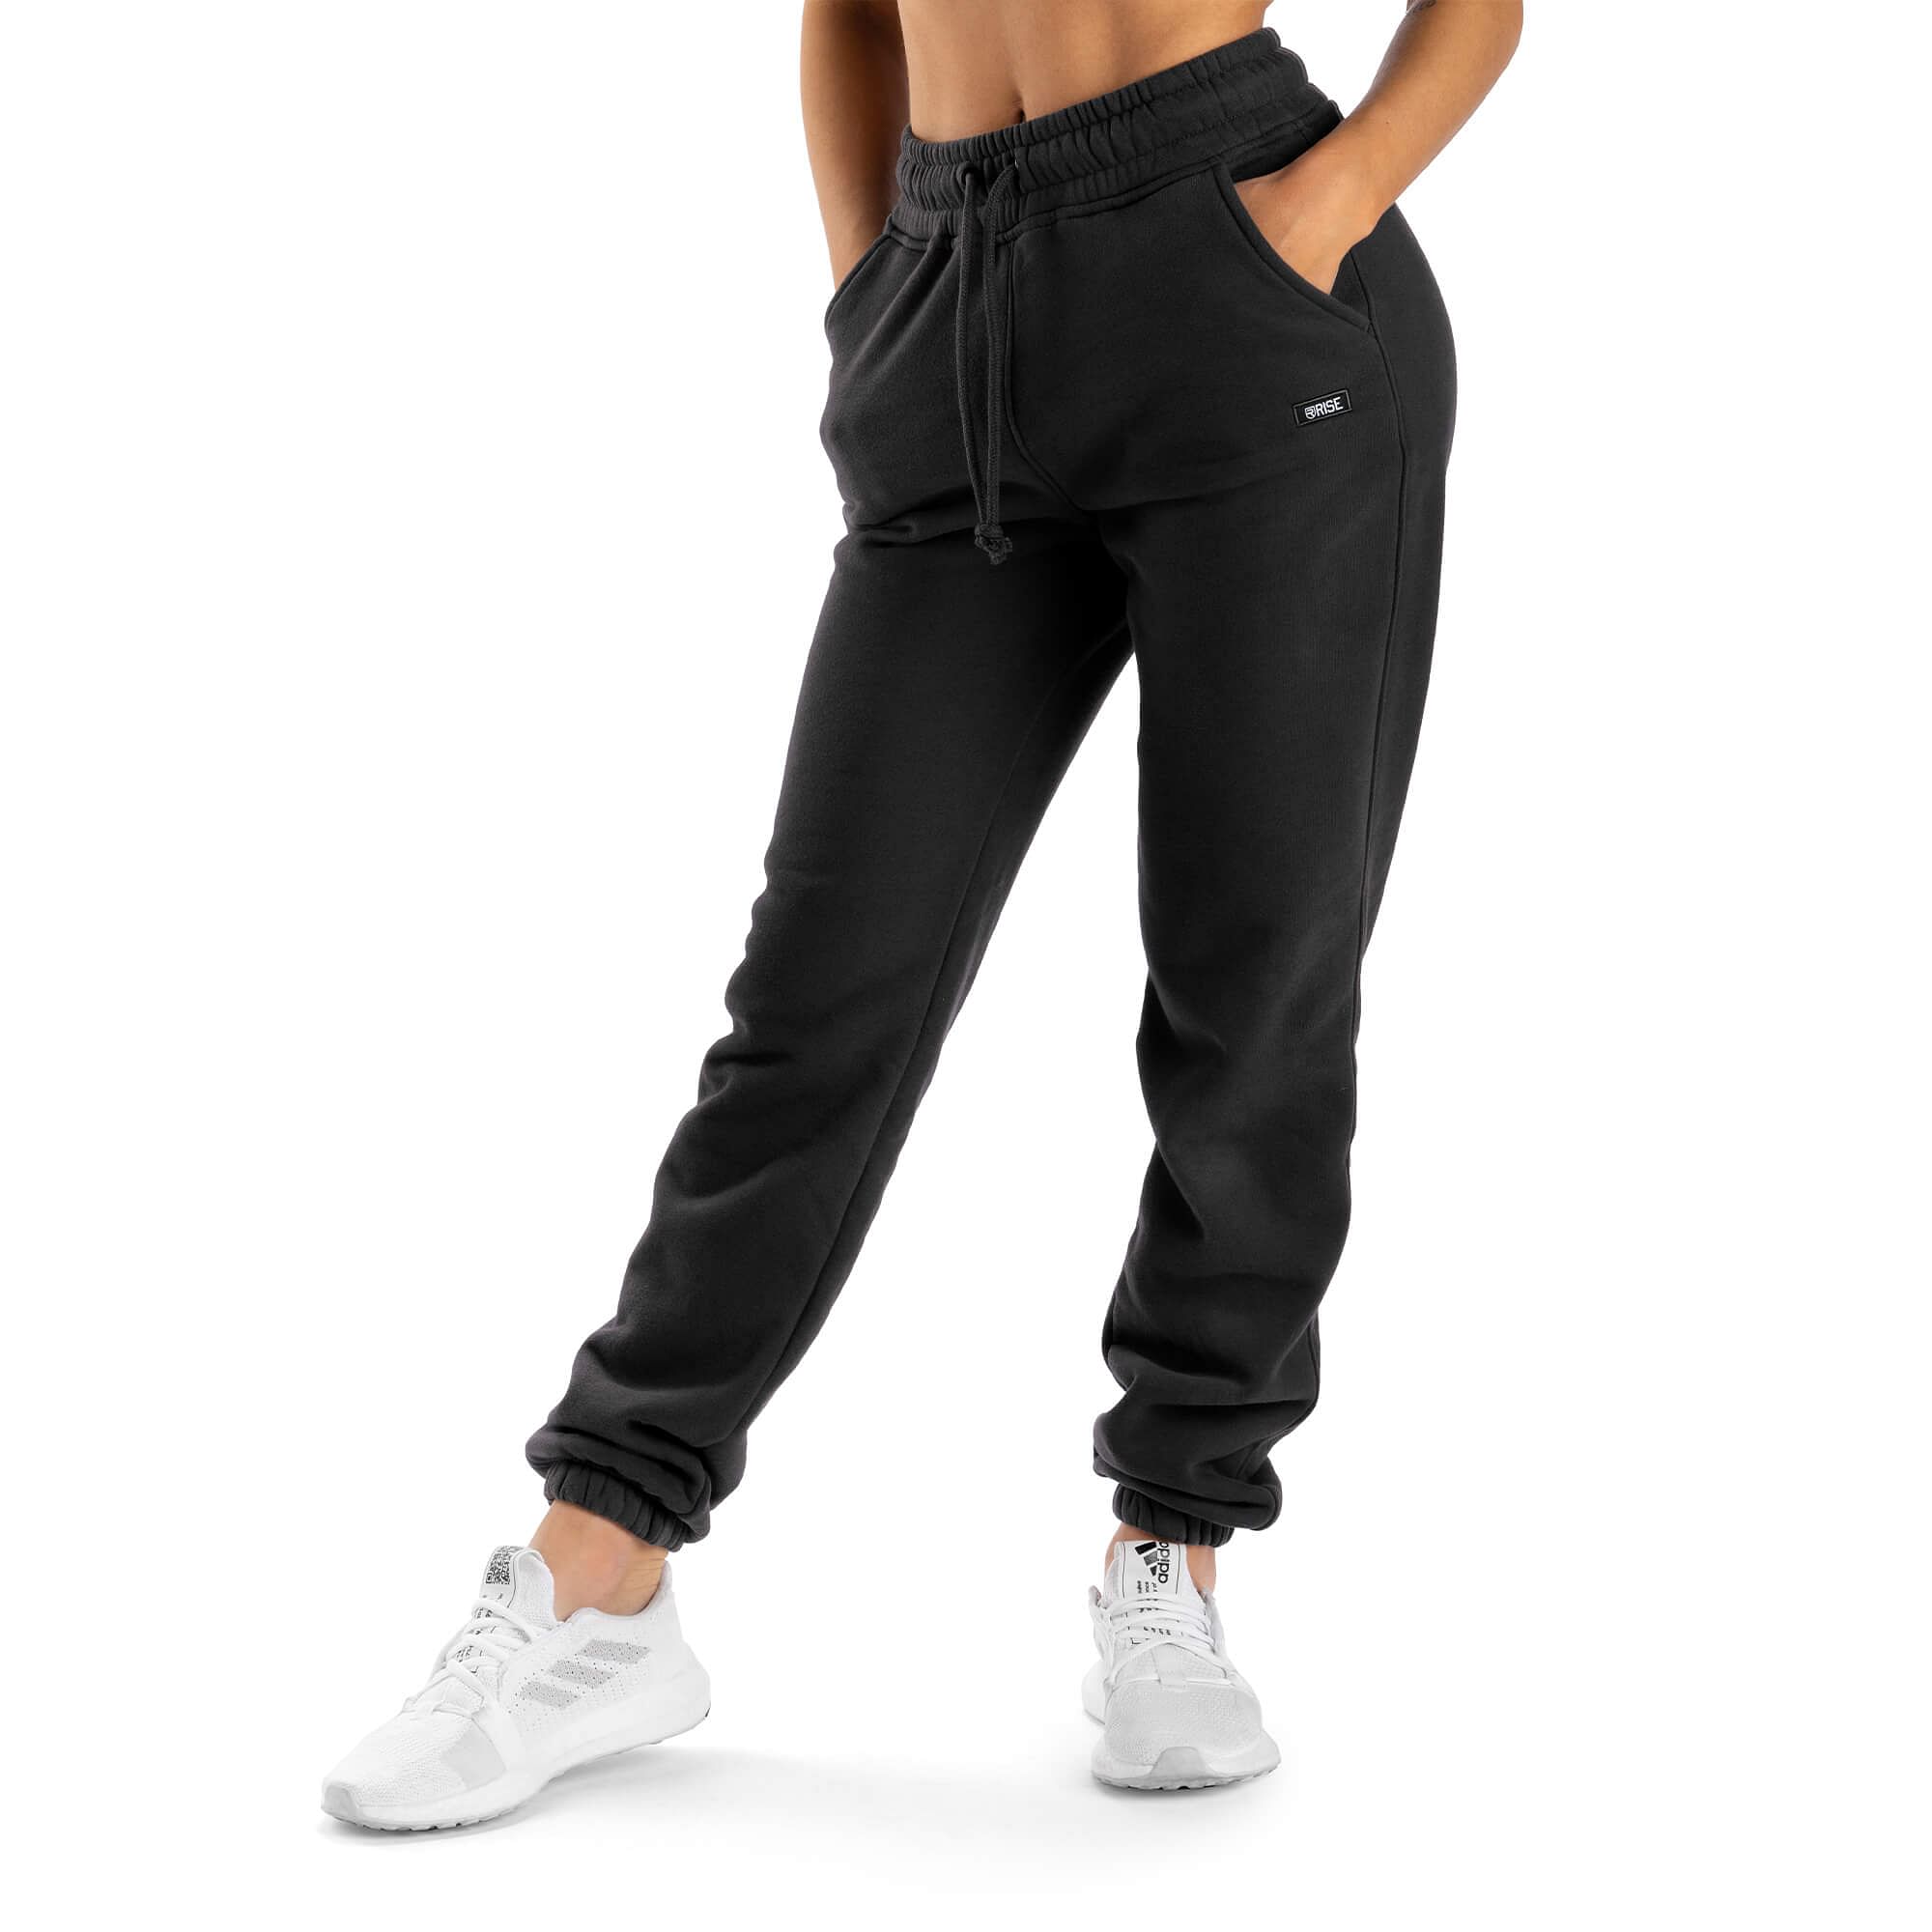 These Women's Joggers Are $12 for Black Friday